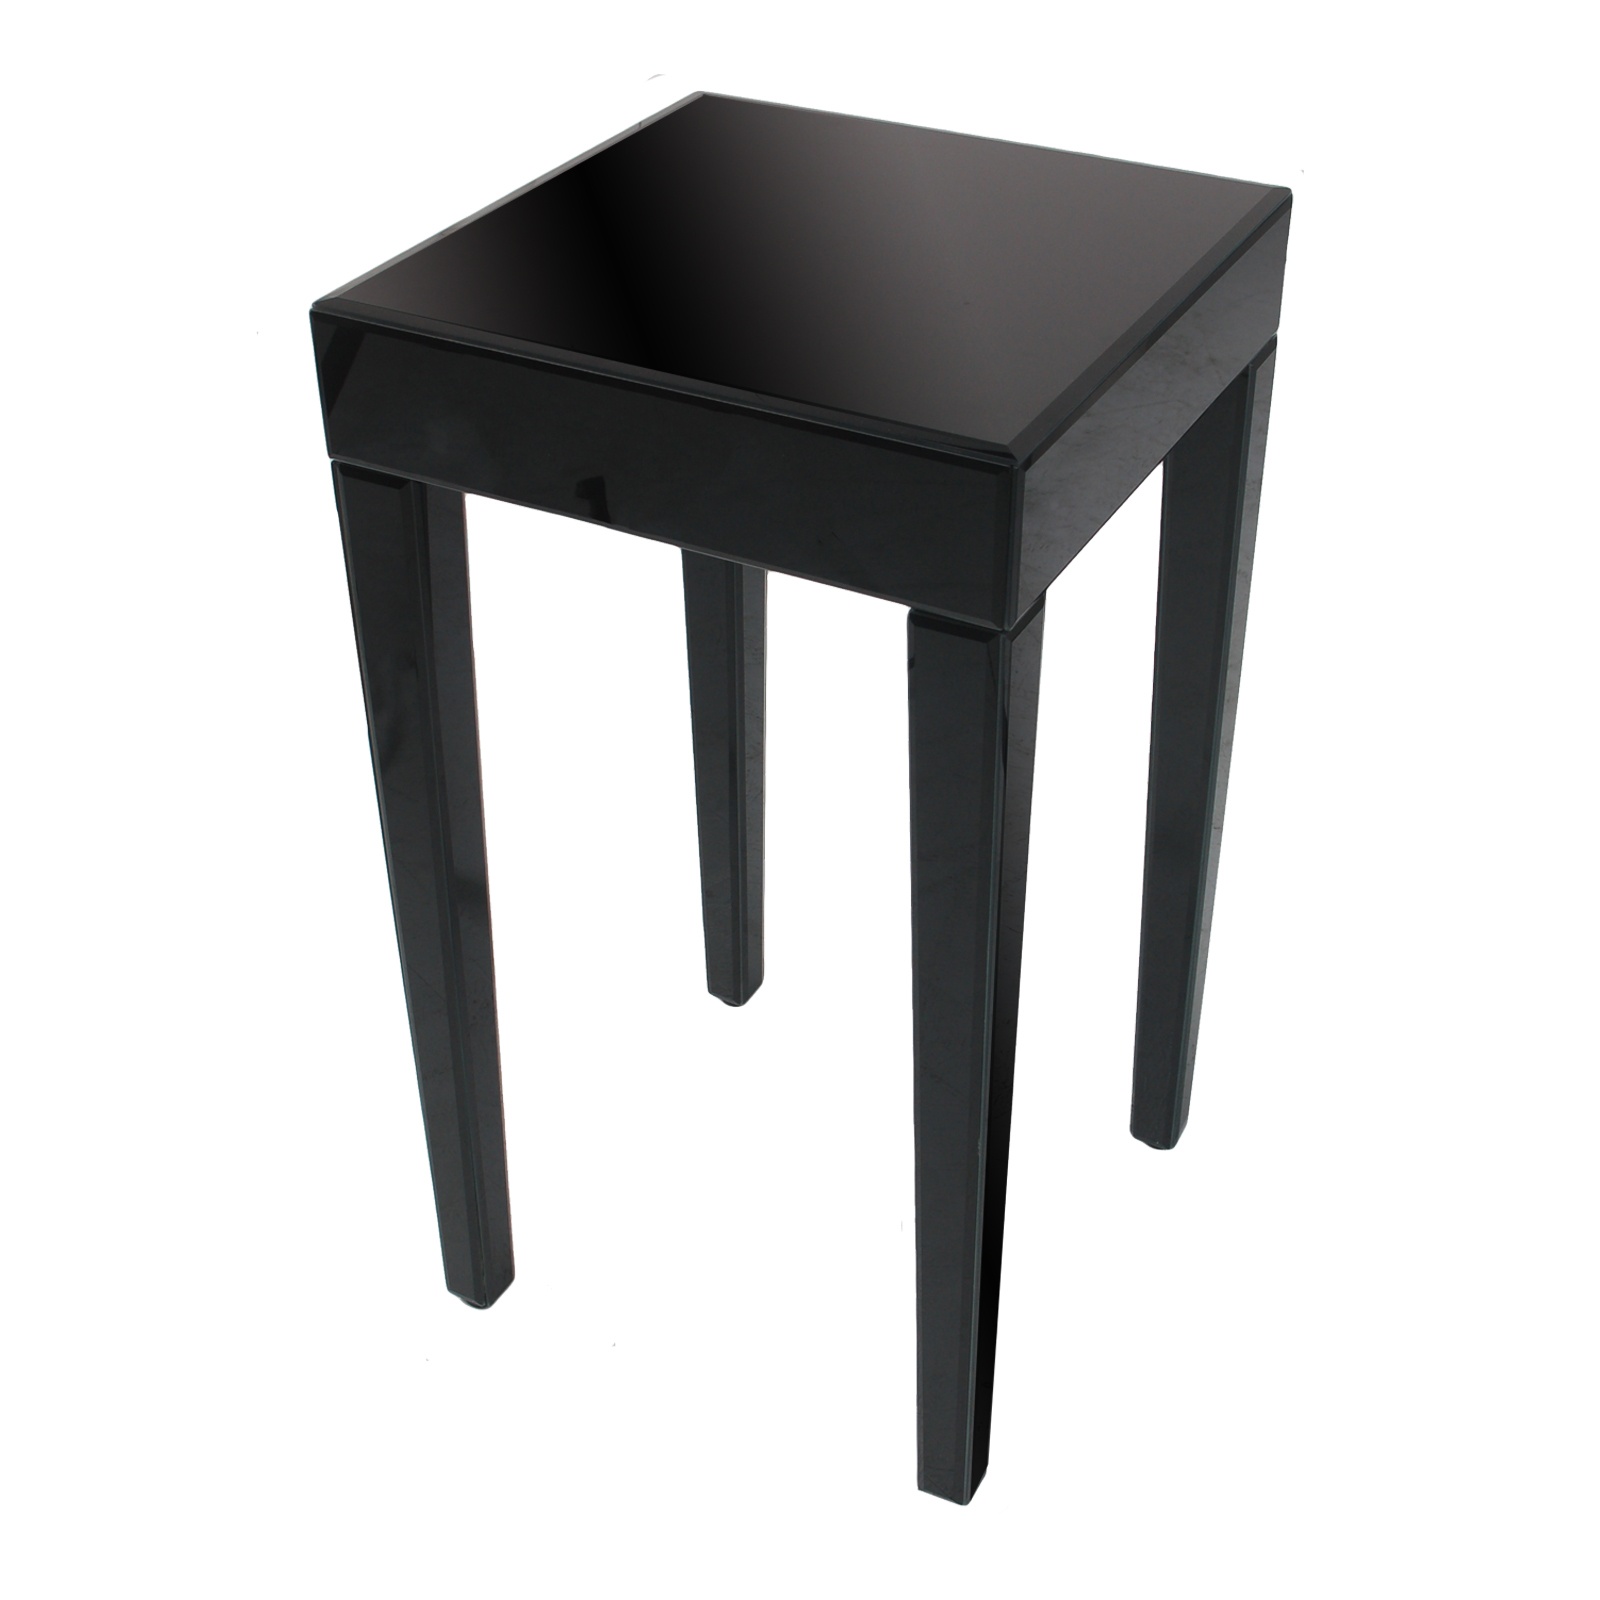 venetian black side table tall formdecor outdoor windham furniture collection home ideas wine holder wood small with storage drum accent tile patio pier one off coupon code